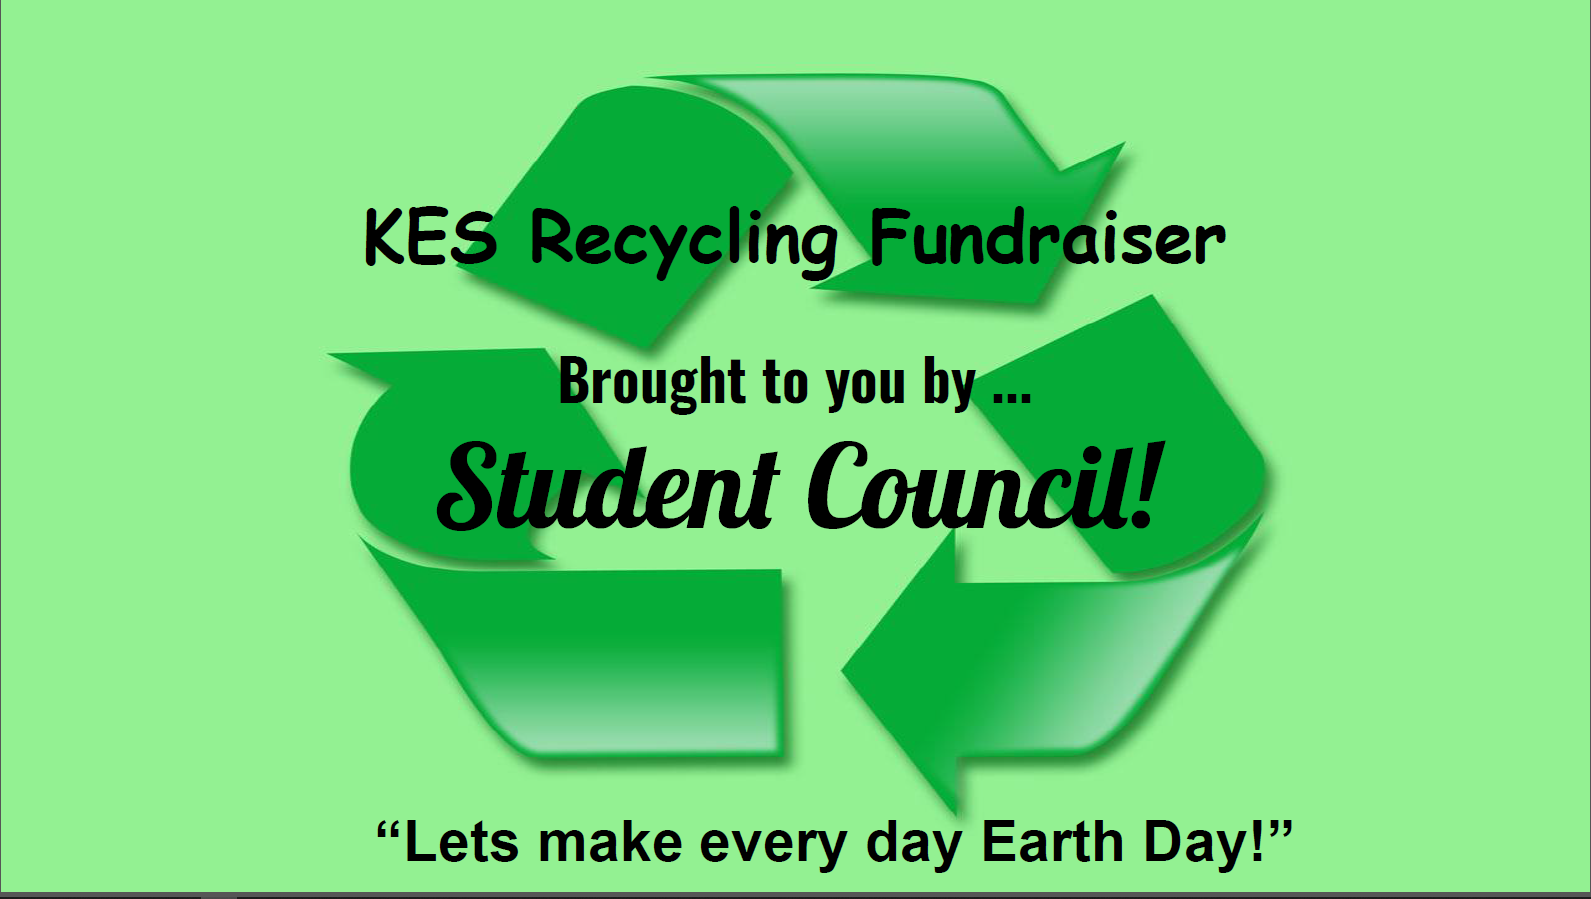 KES Recycling Fundraiser Video by Student Council 